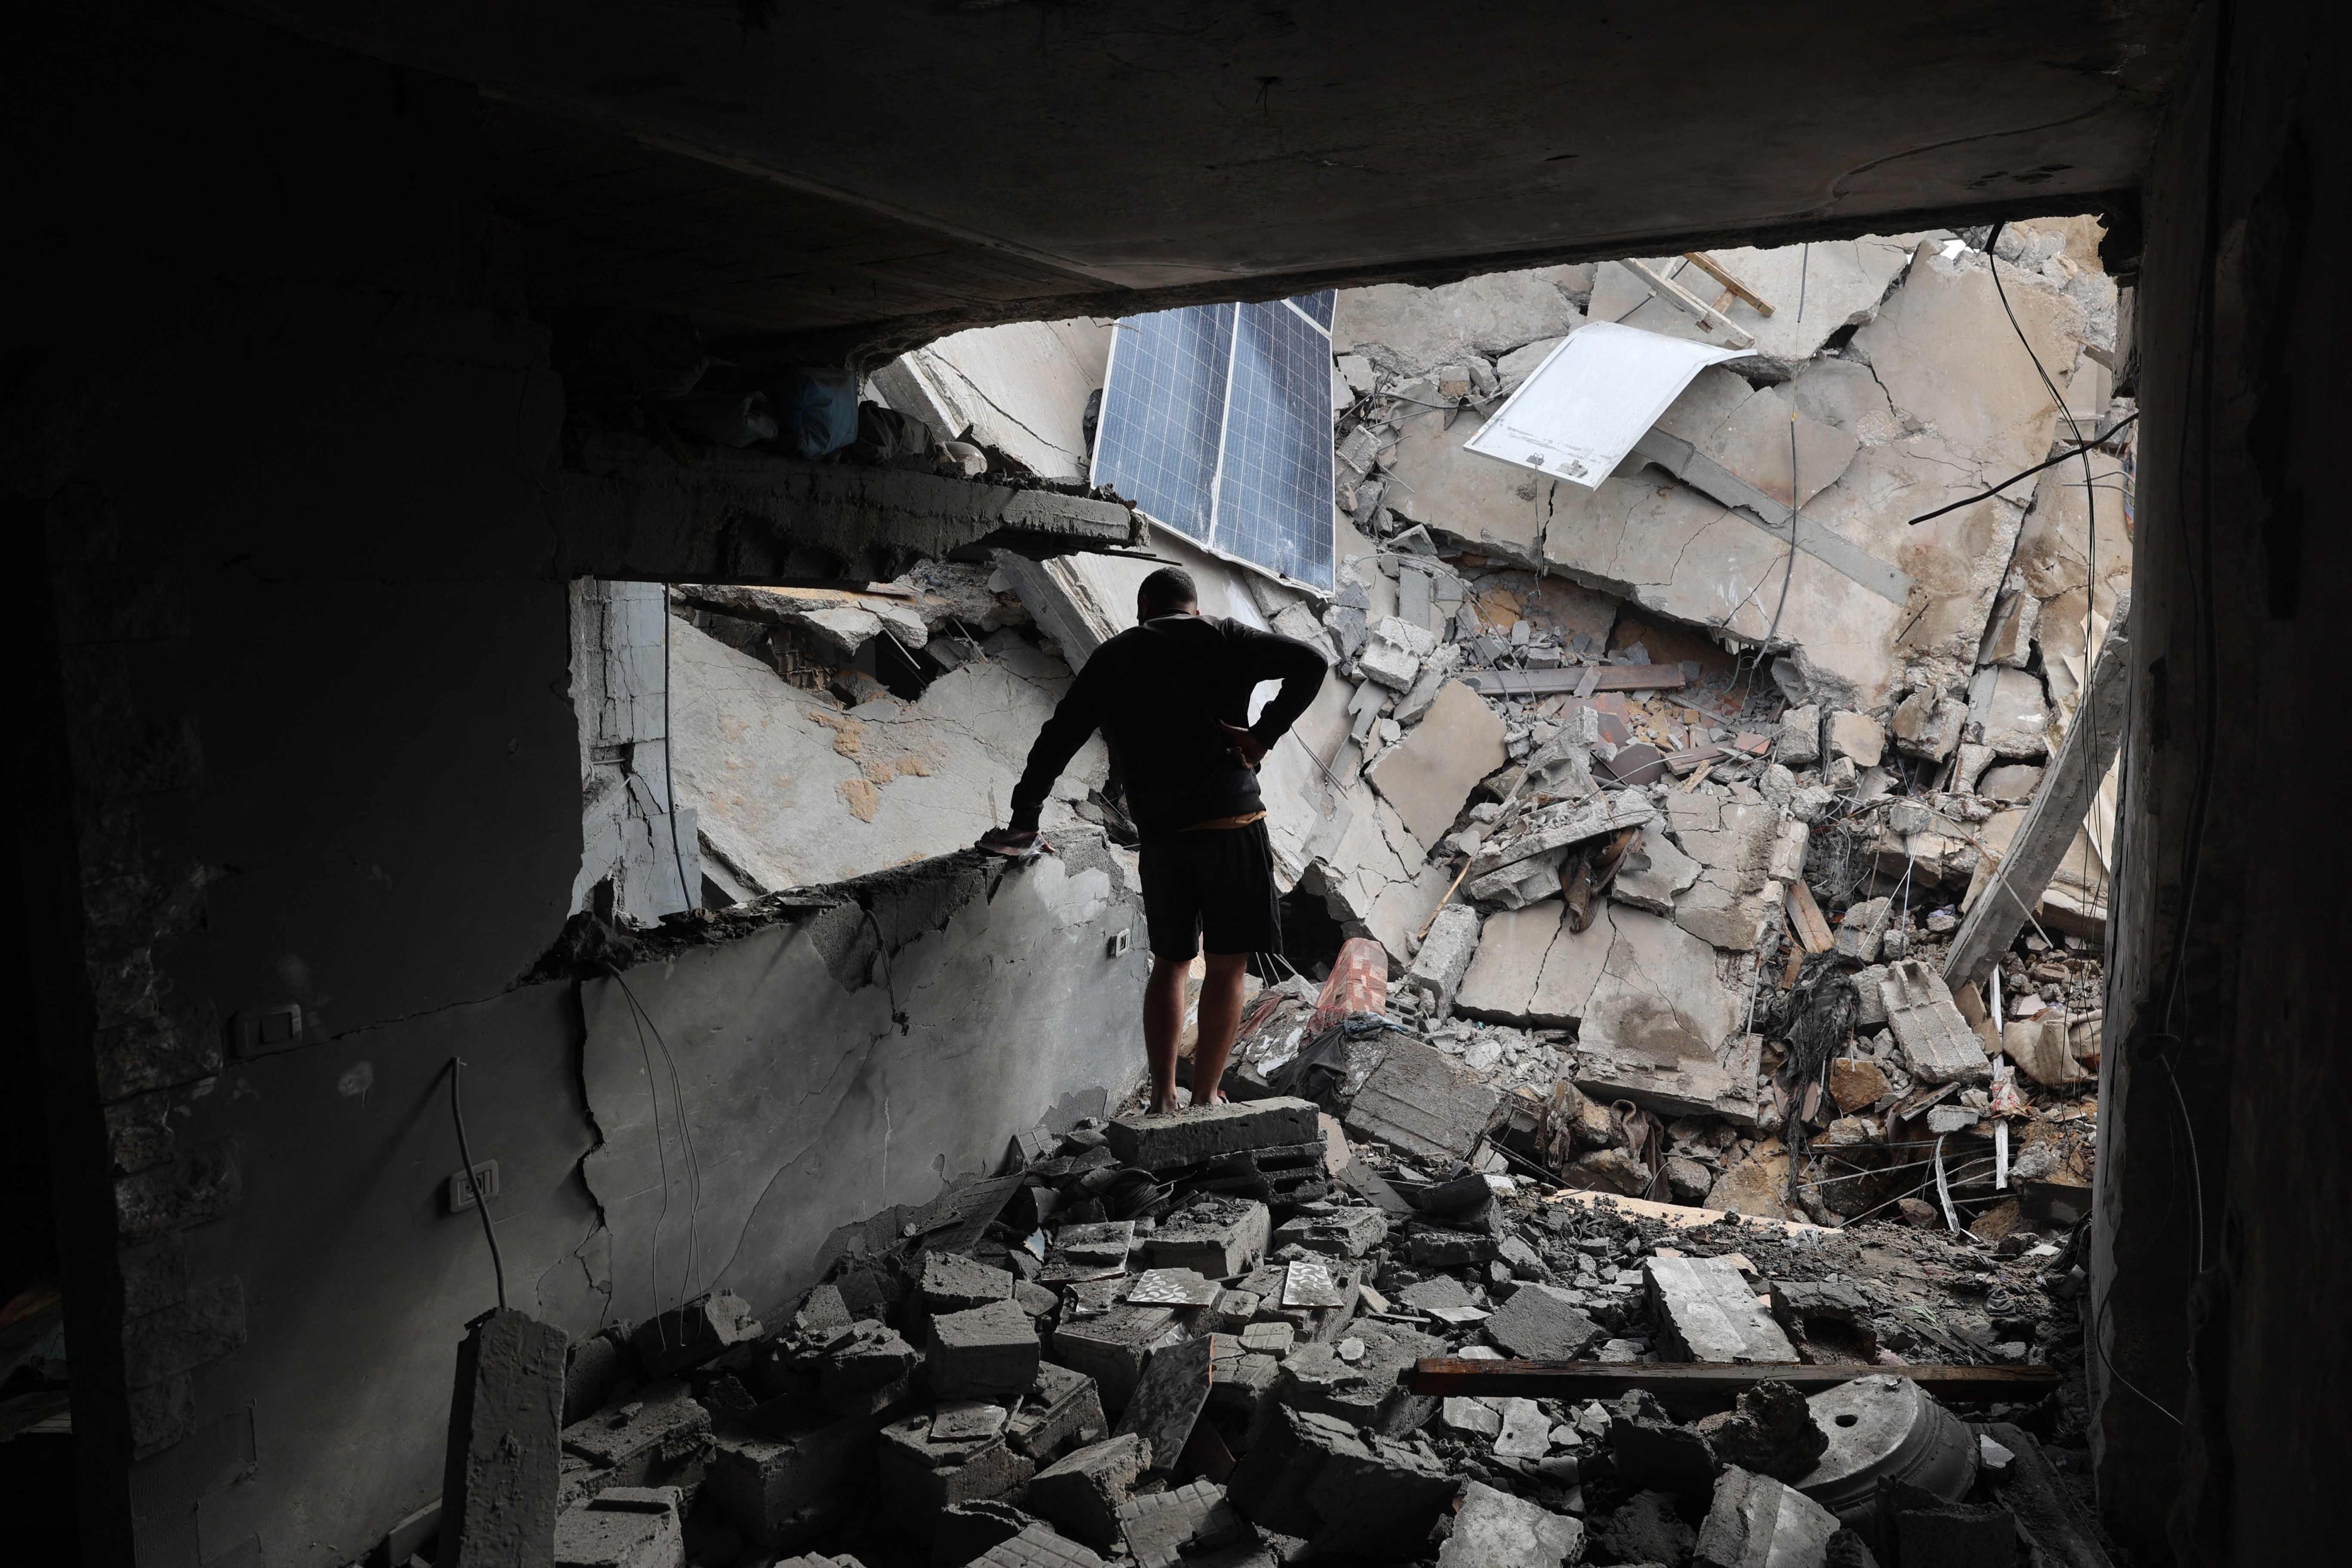 A Palestinian man inspects the destruction outside a house struck by Israeli bombardment in Rafah’s Tal al-Sultan district in the southern Gaza Strip. Photo: AFP